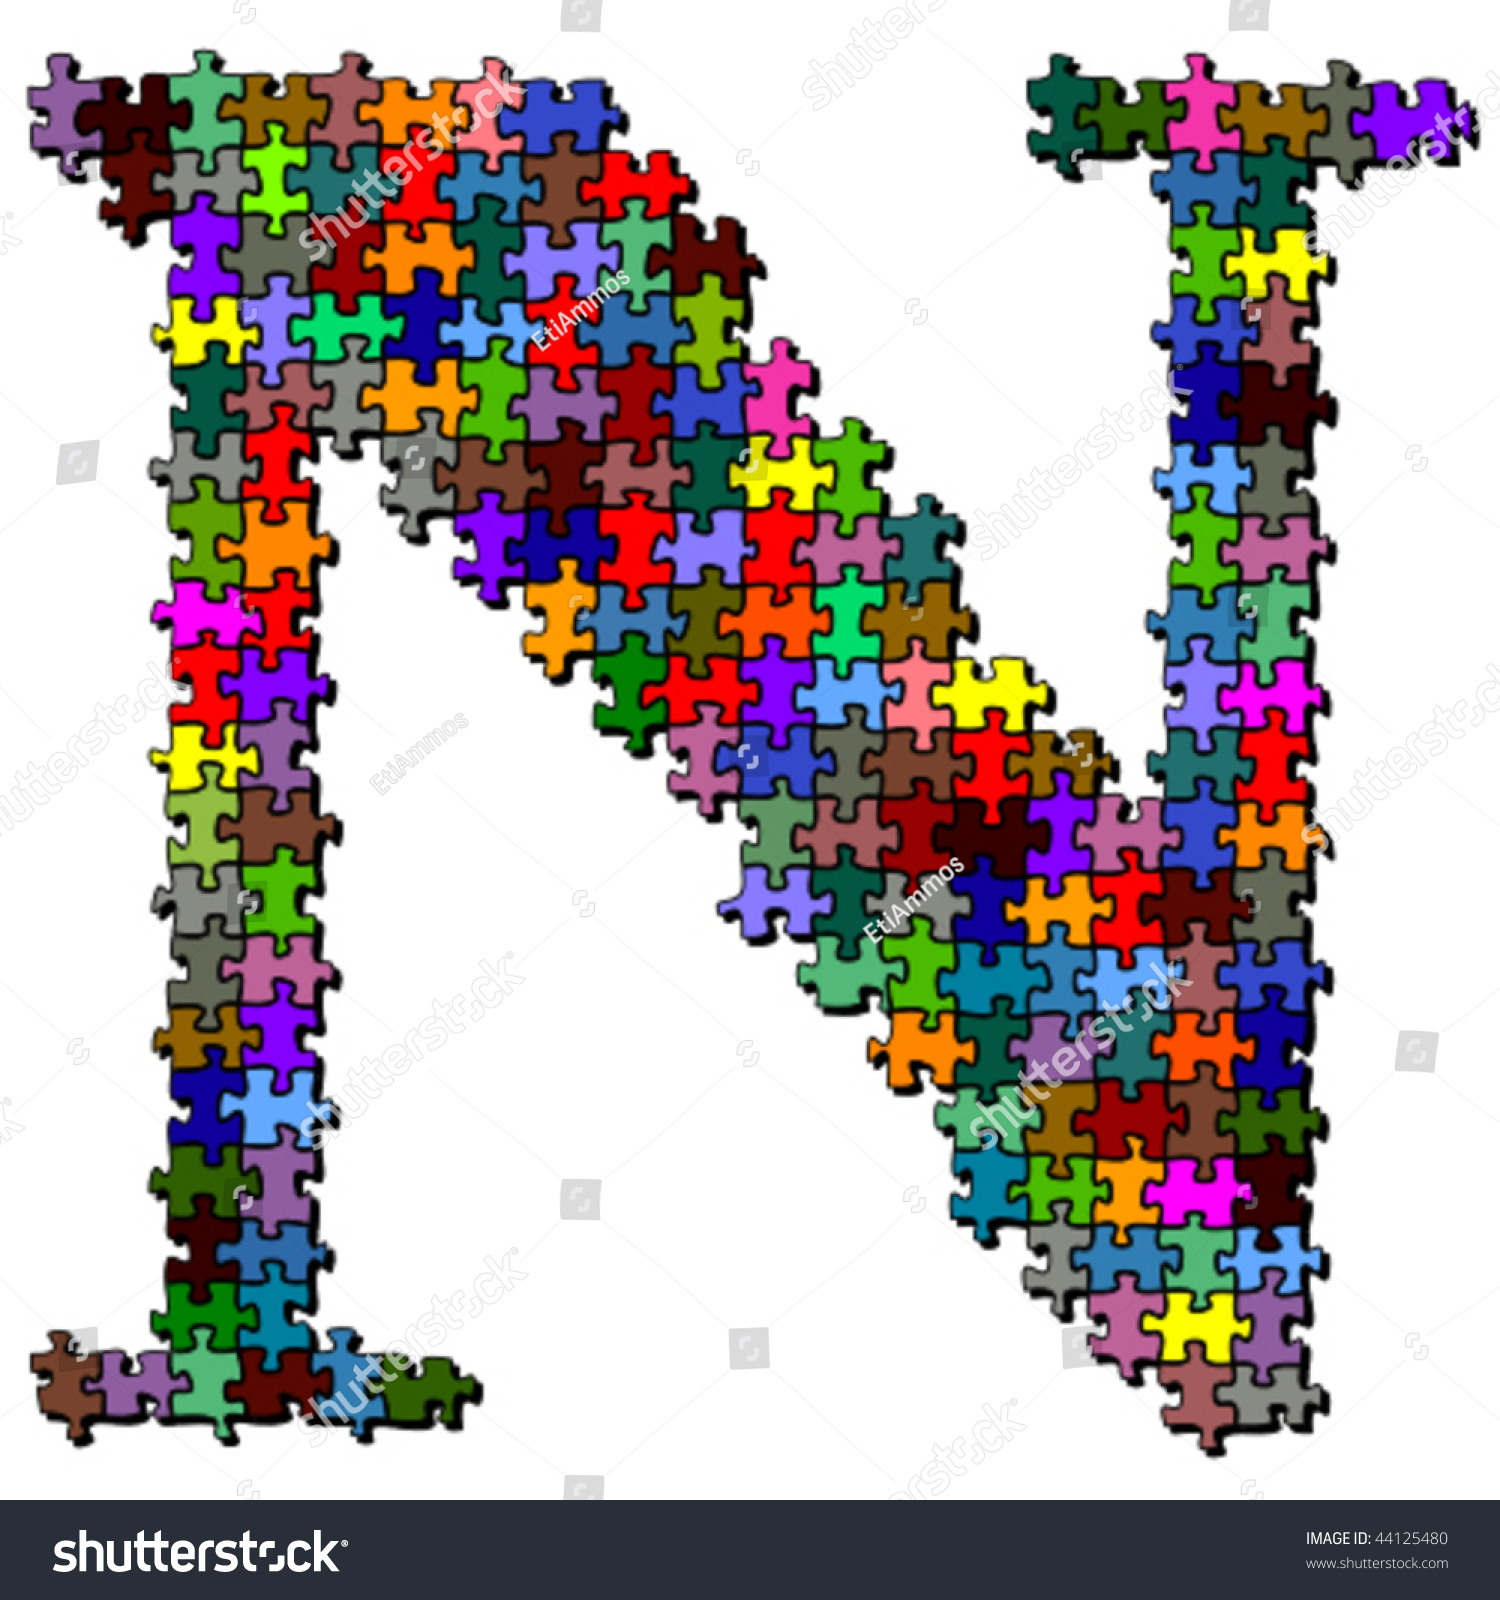 Letter Made Of Colored Puzzle Pieces - Vector Illustration - 44125480 ...